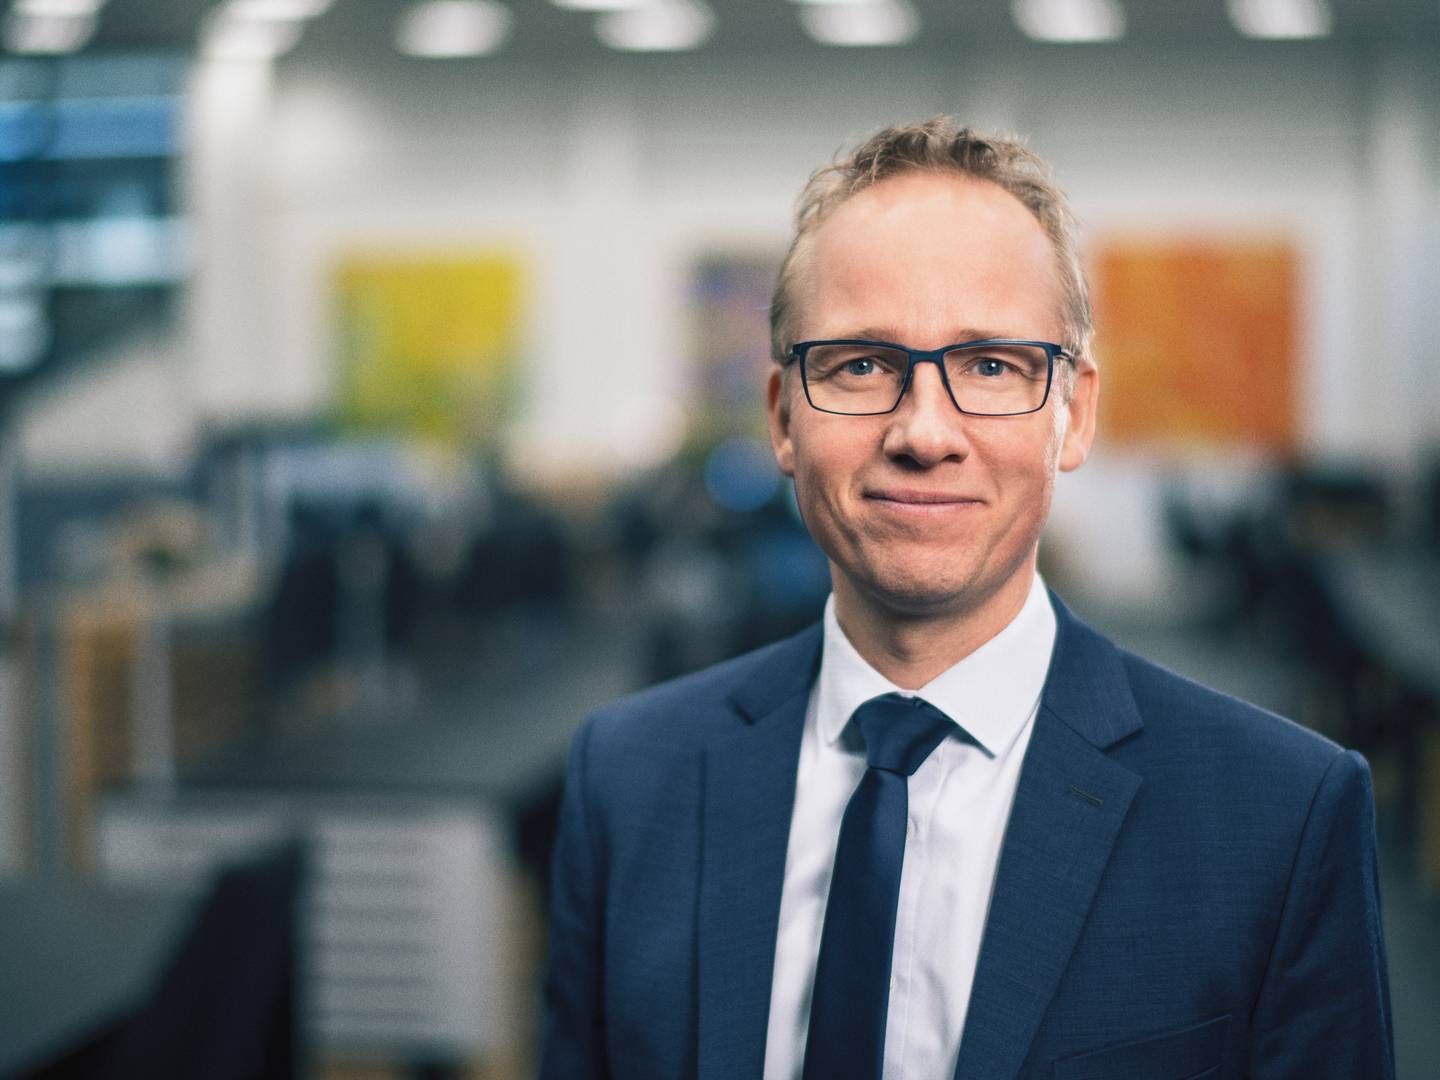 Jacob Pedersen, head of equity research at Sydbank. | Photo: Sydbank